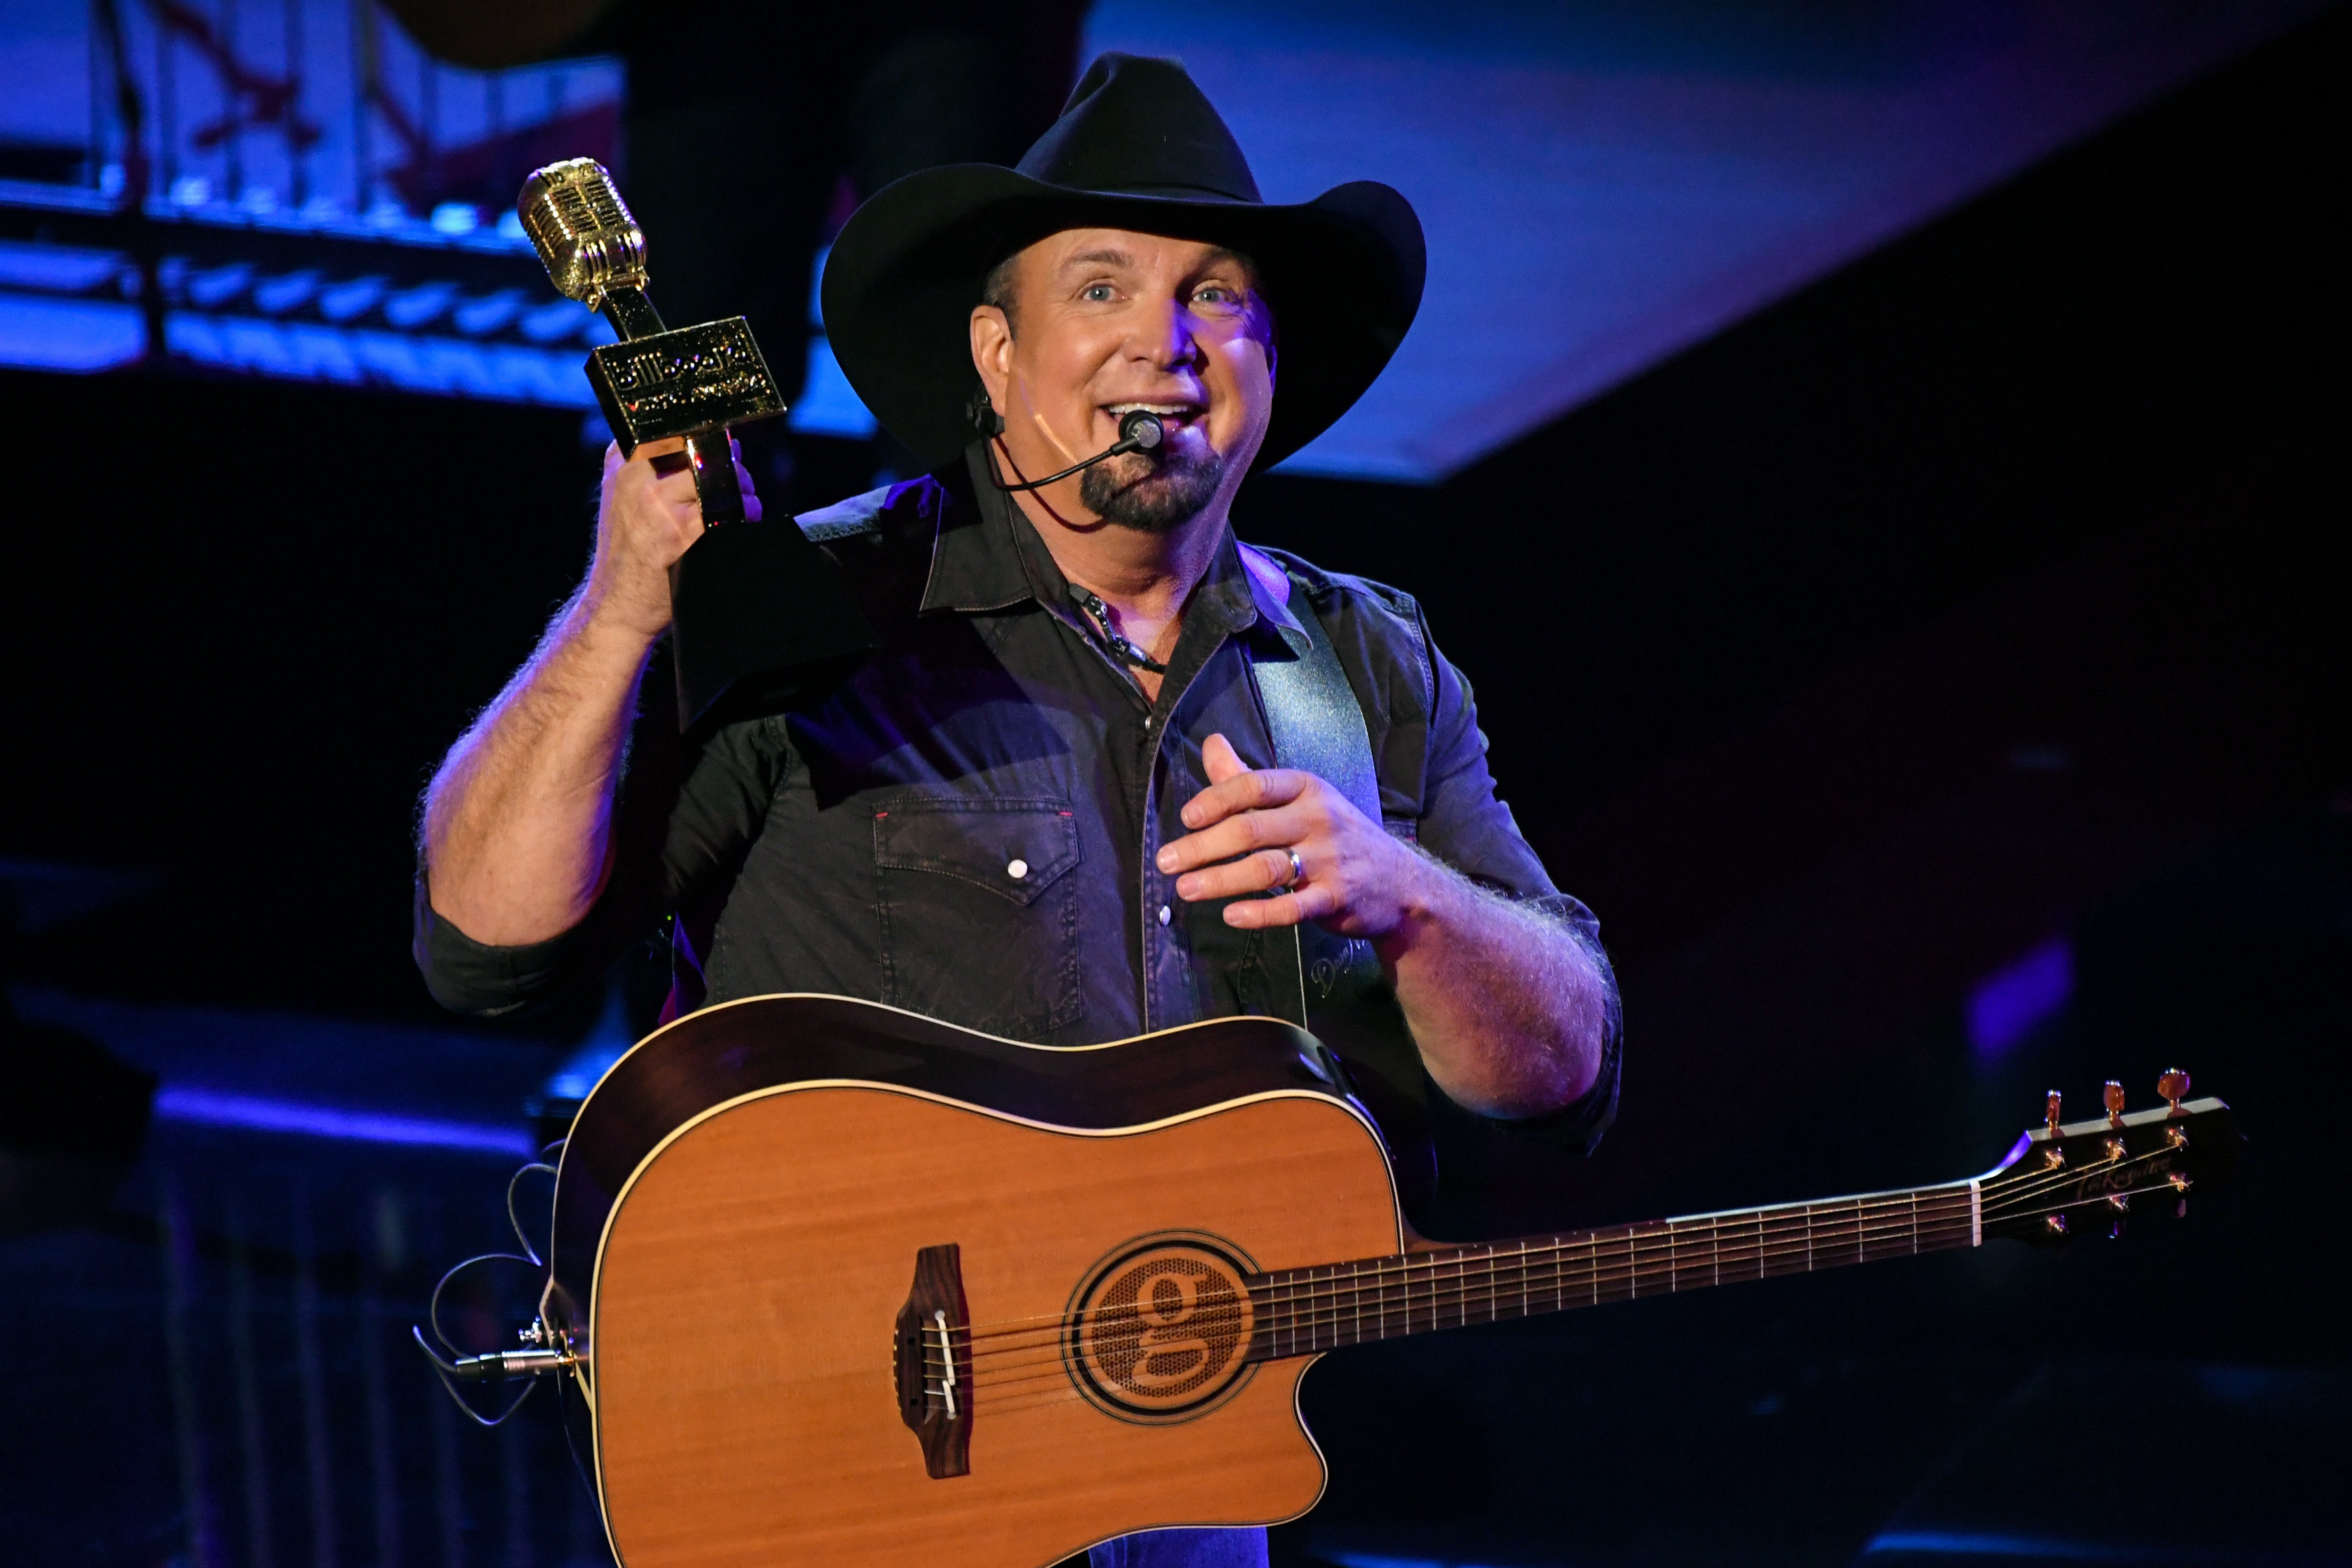 Garth Brooks performing in Biden’s possession, jokes that he will be “only Republican” there